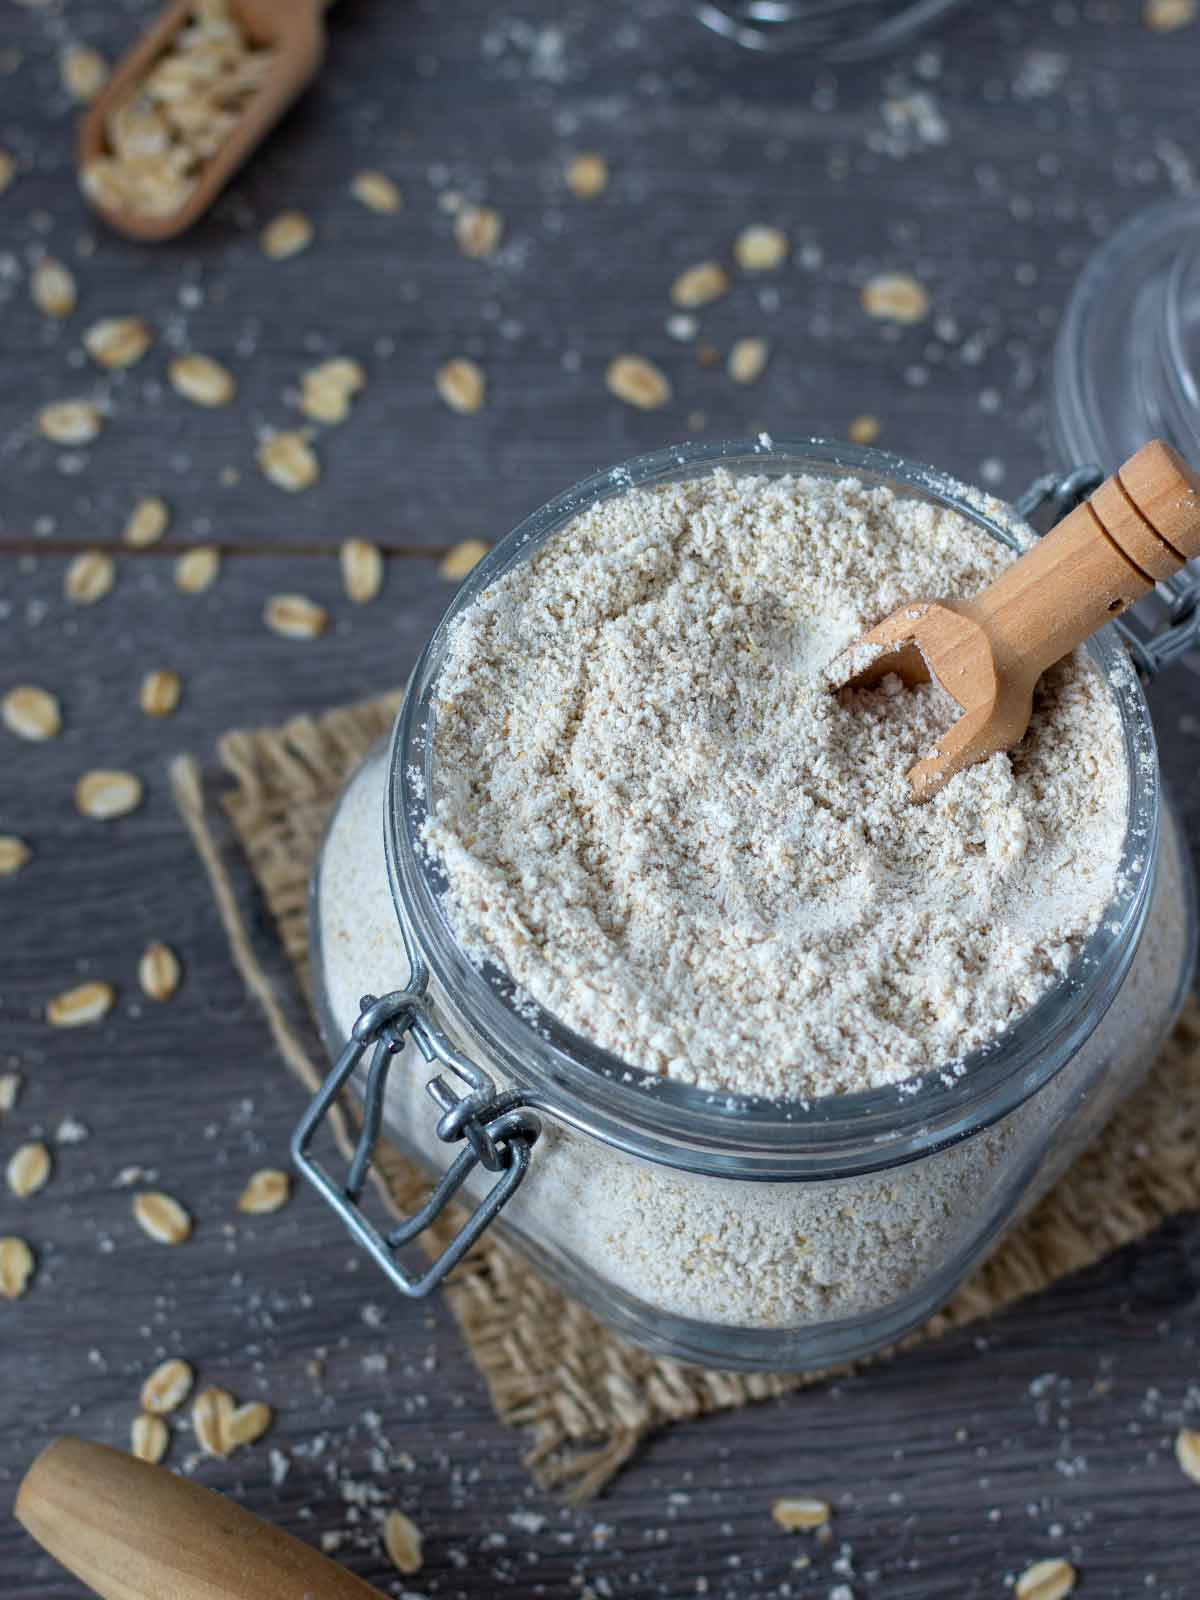 Homemade whole-grain flour made from ground rolled oats in a glass jar with wooden spoon